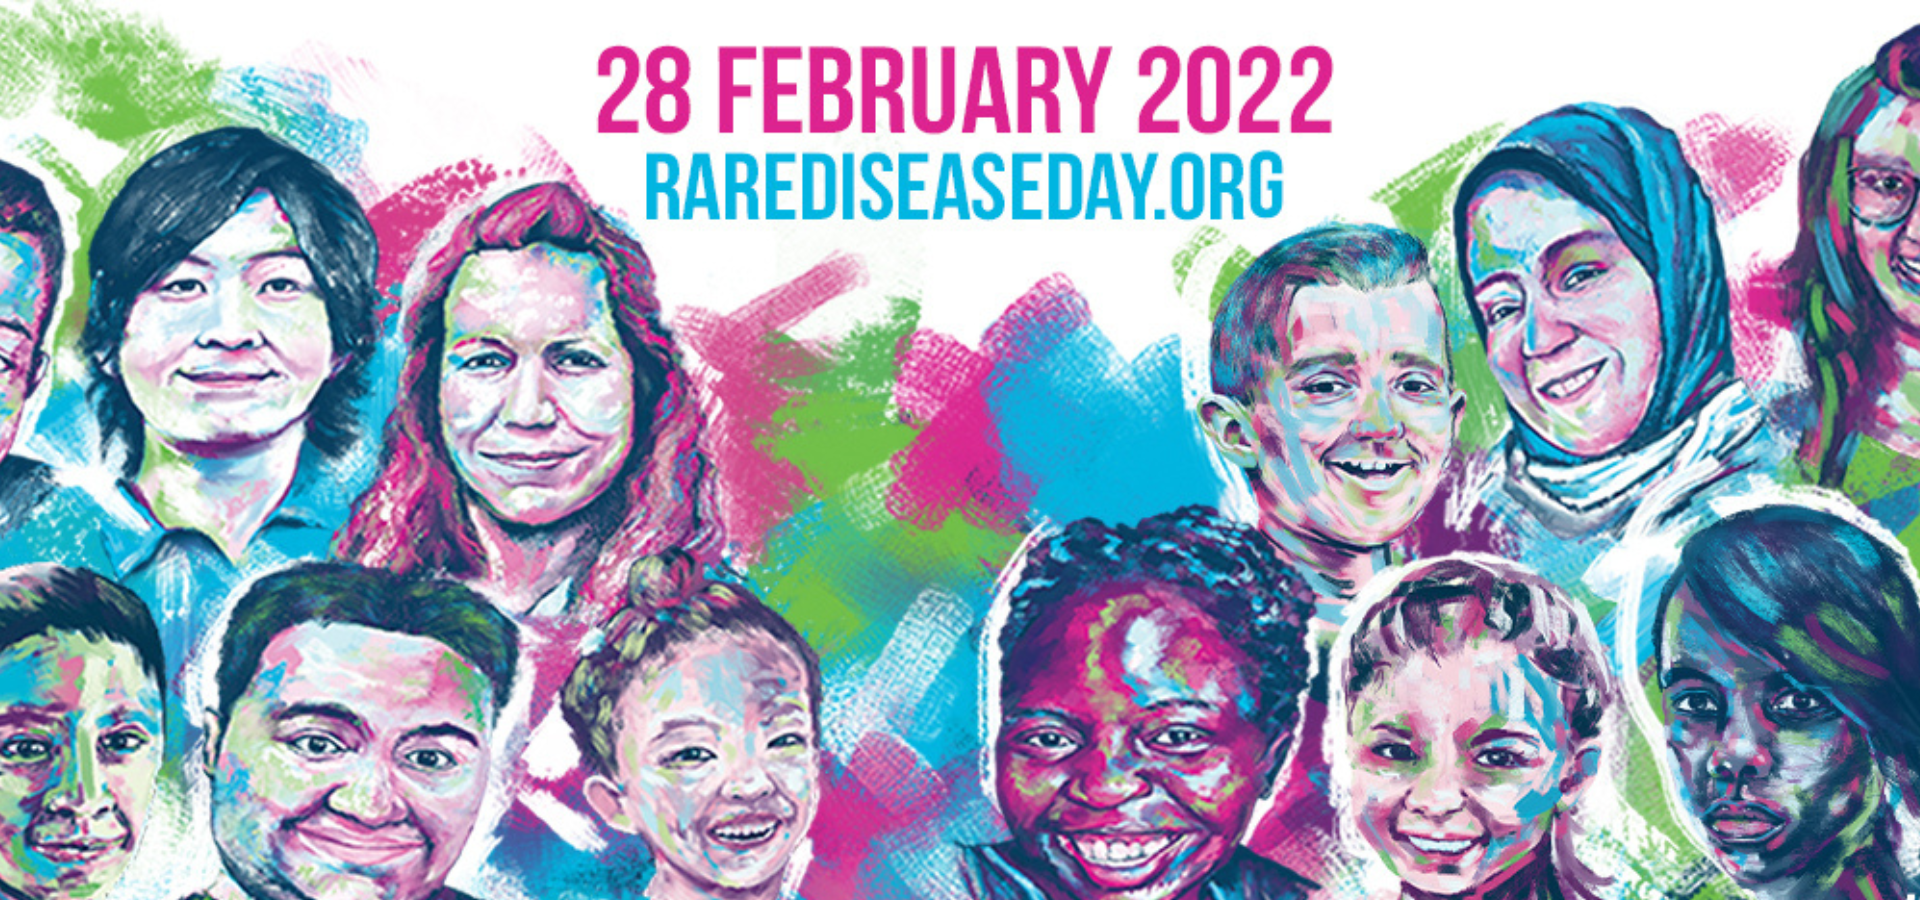 Rare Disease Daty 2023 web banner depicting pencil drawn illustrations of lots of people